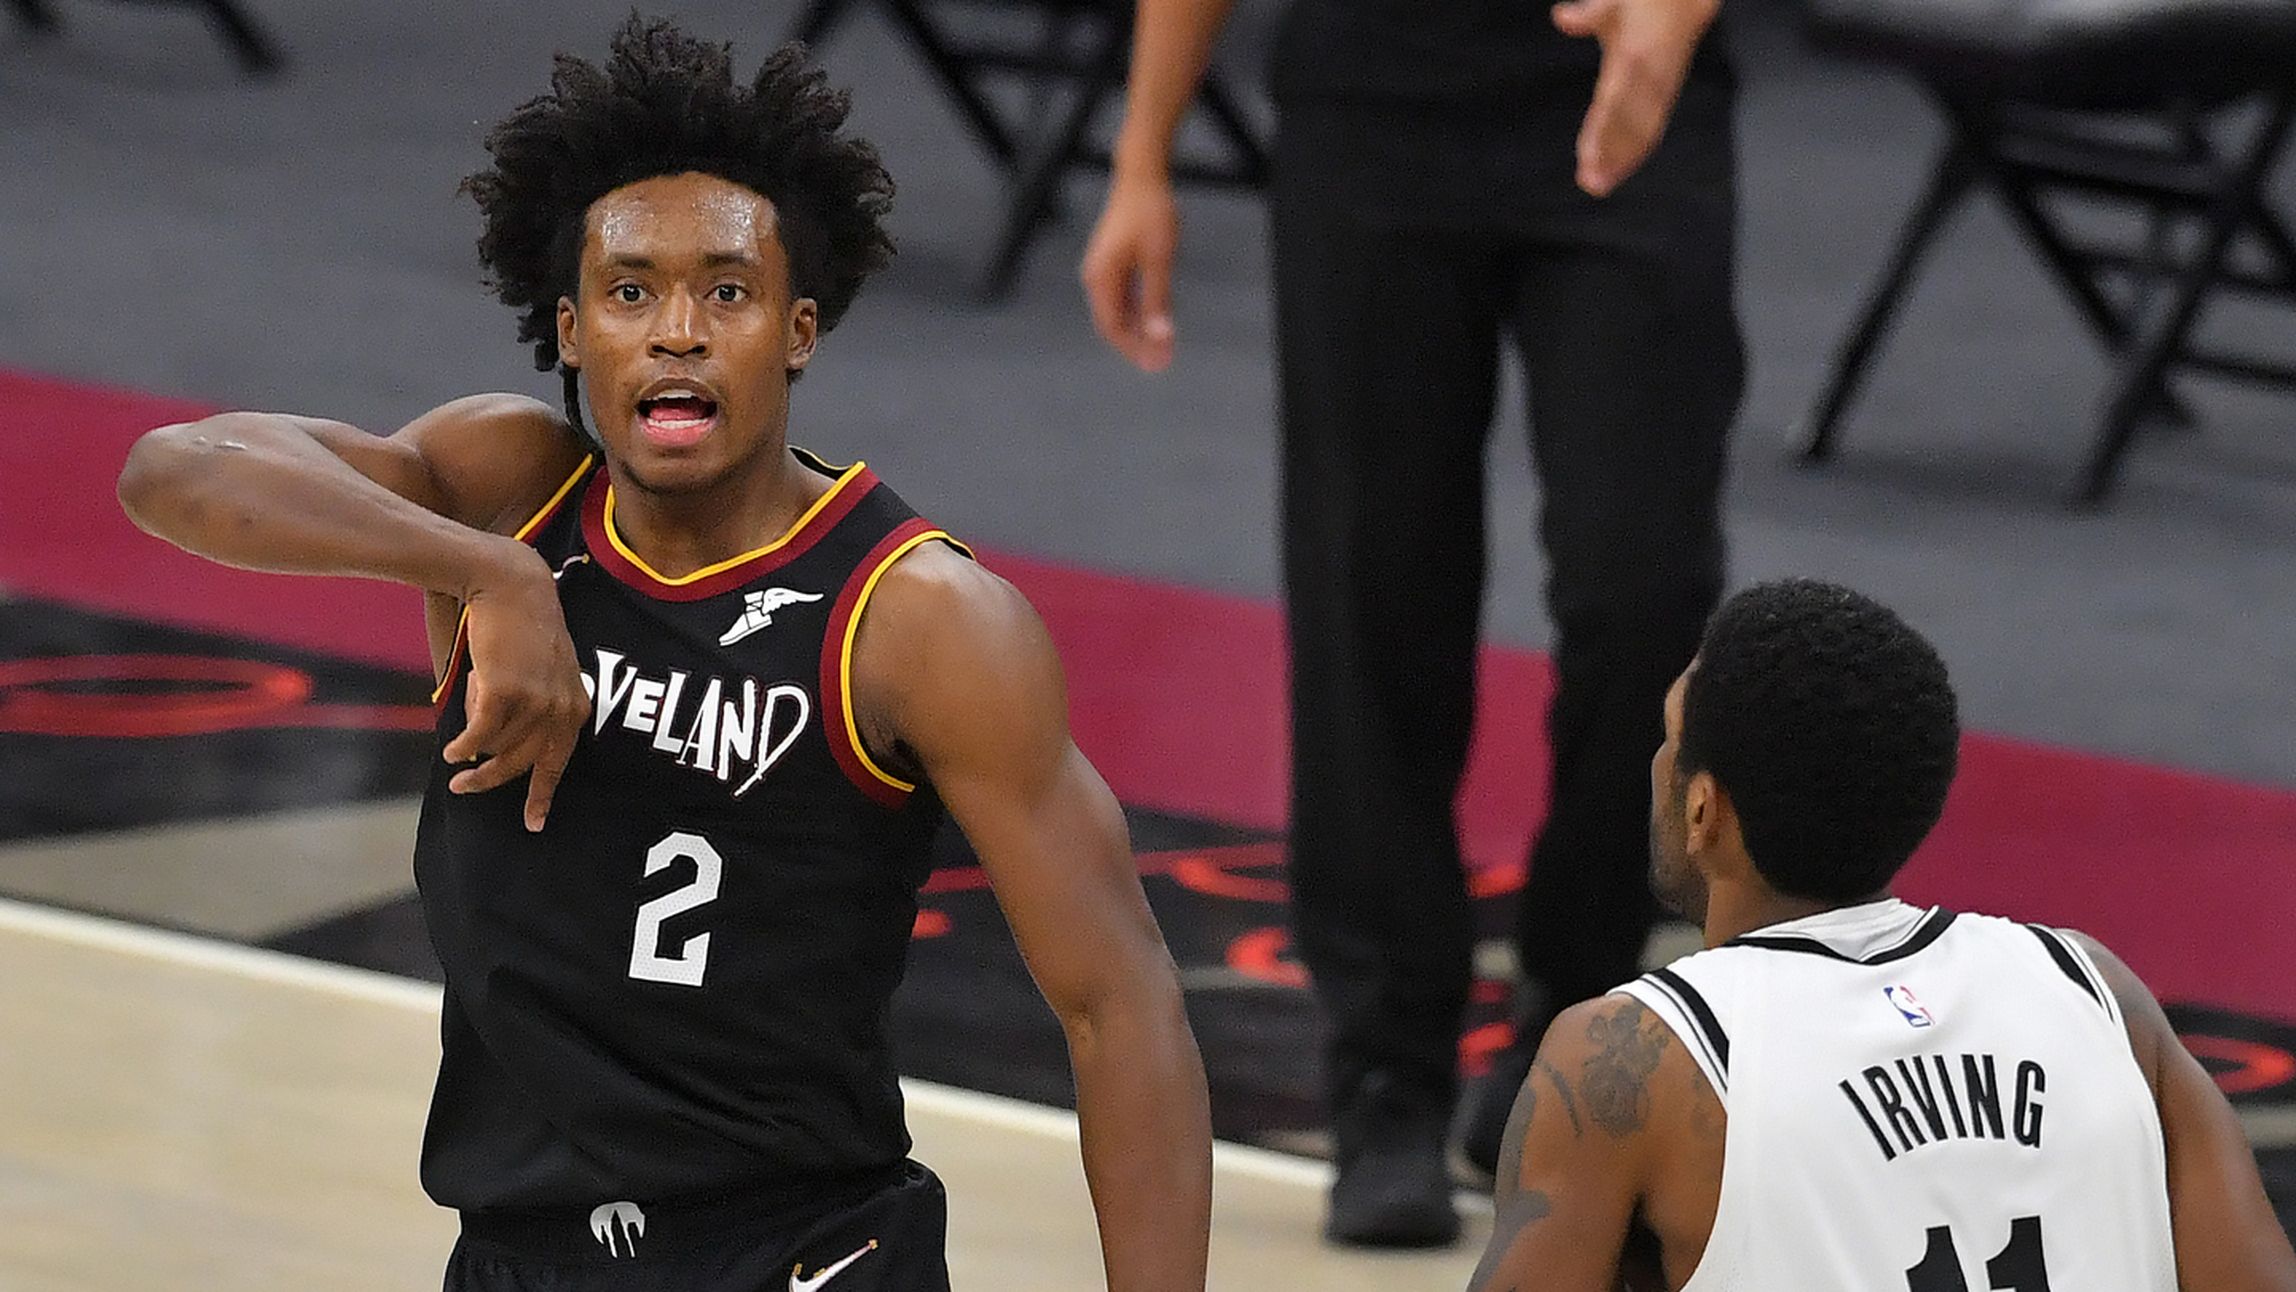 Returning Kyrie Irving out-duelled by Collin Sexton in wild, double overtime NBA thriller